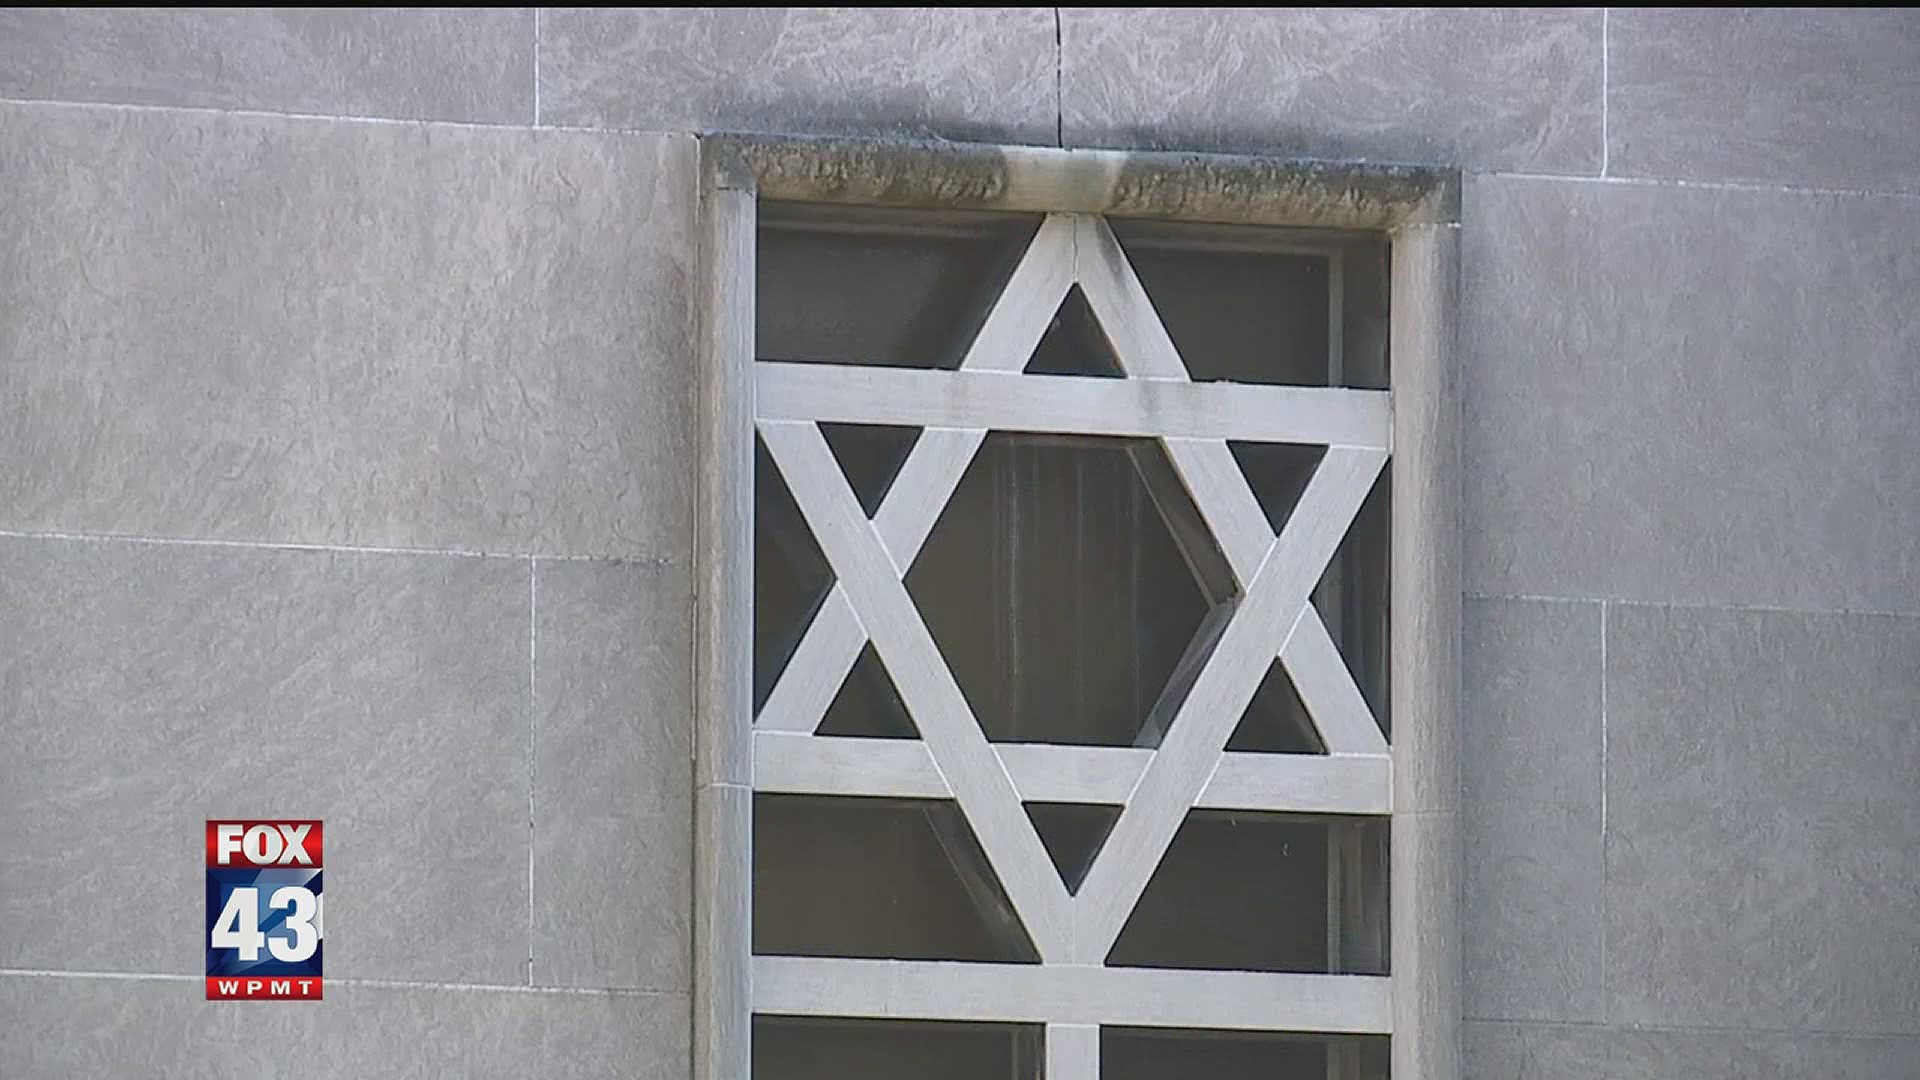 After a hate crime was committed against a Harrisburg synagogue, the Mayor’s Interfaith Advisory Council held a vigil to stand behind the Jewish community.